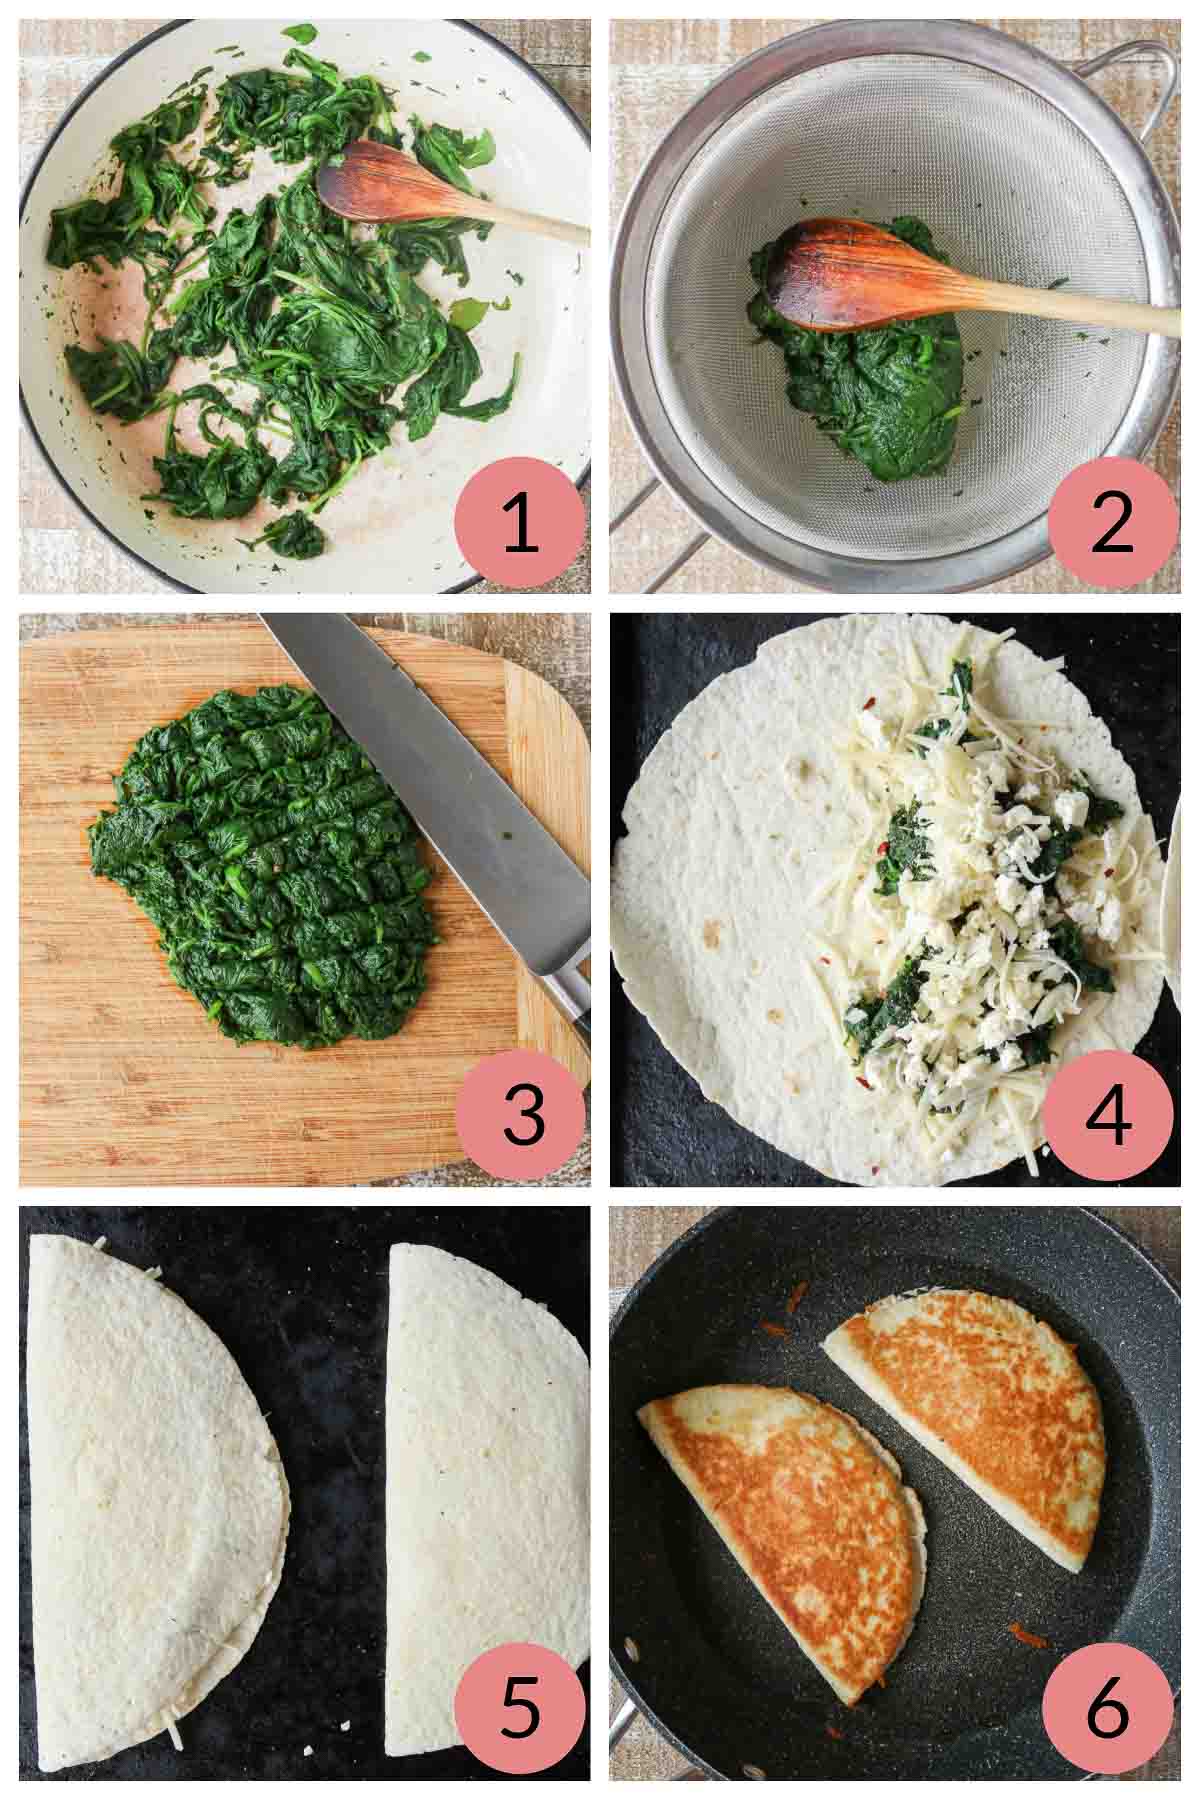 Collage of steps to make quesadillas with spinach and cheese.